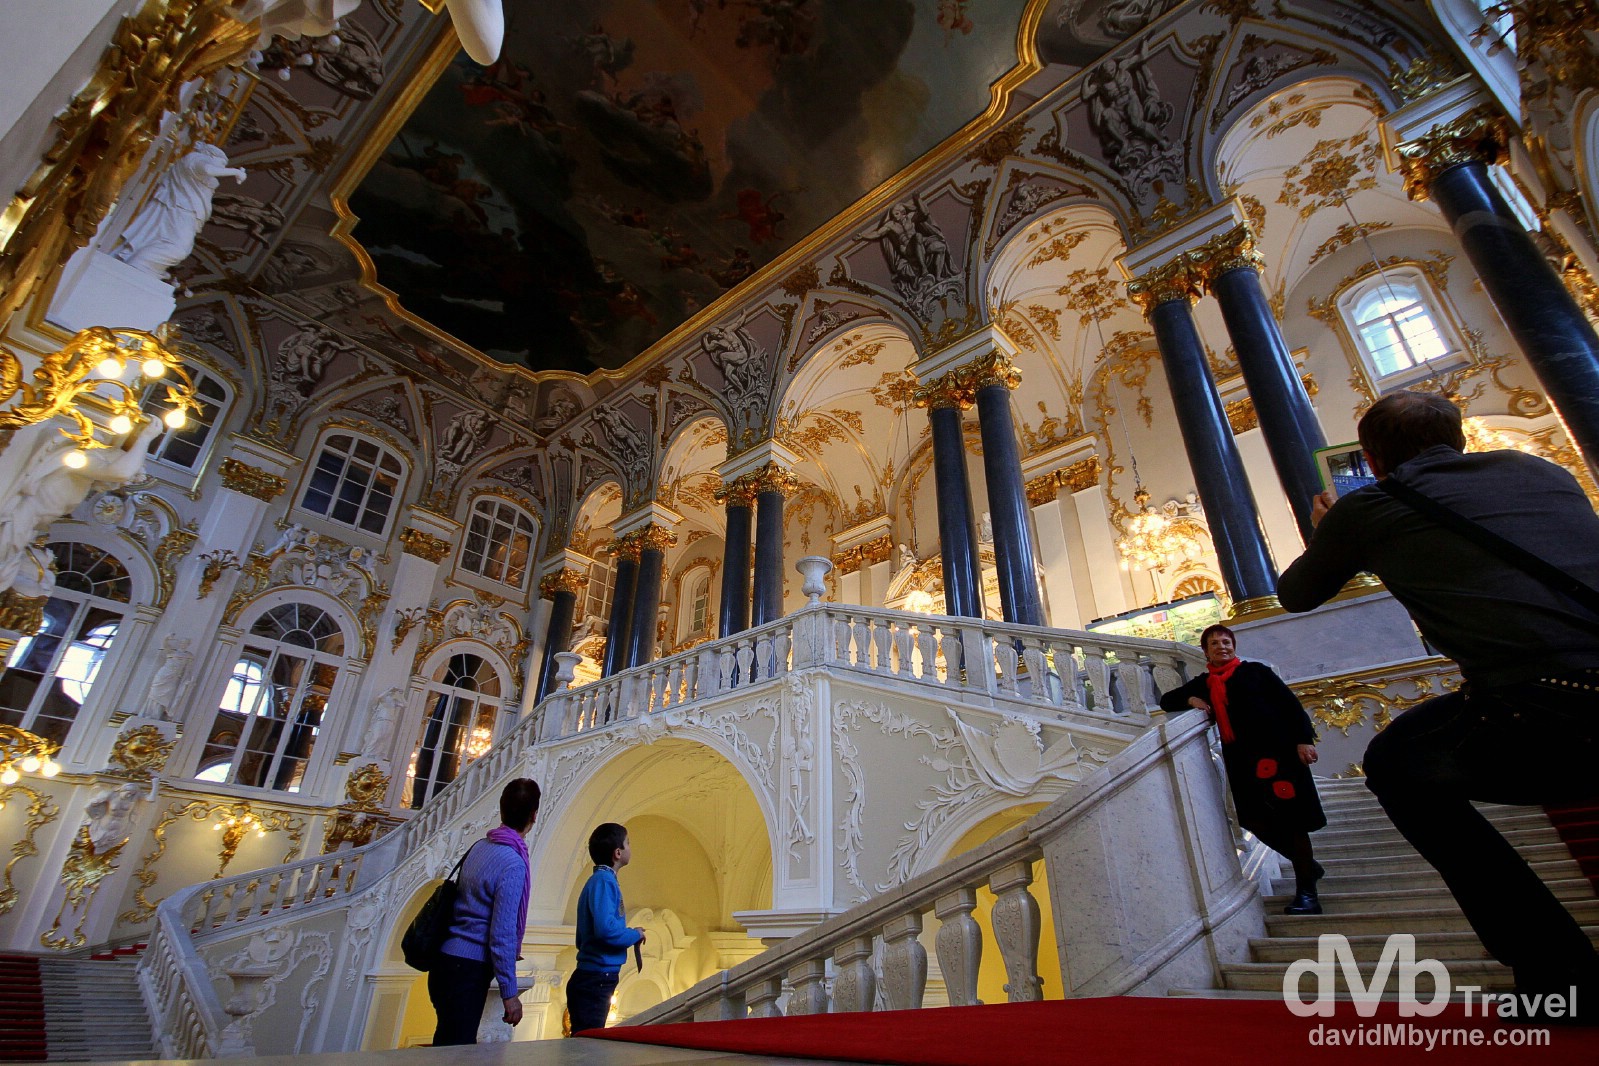 People on the Jordan Staircase of the Winter Palace, St Petersburg, Russia. November 22nd 2012.